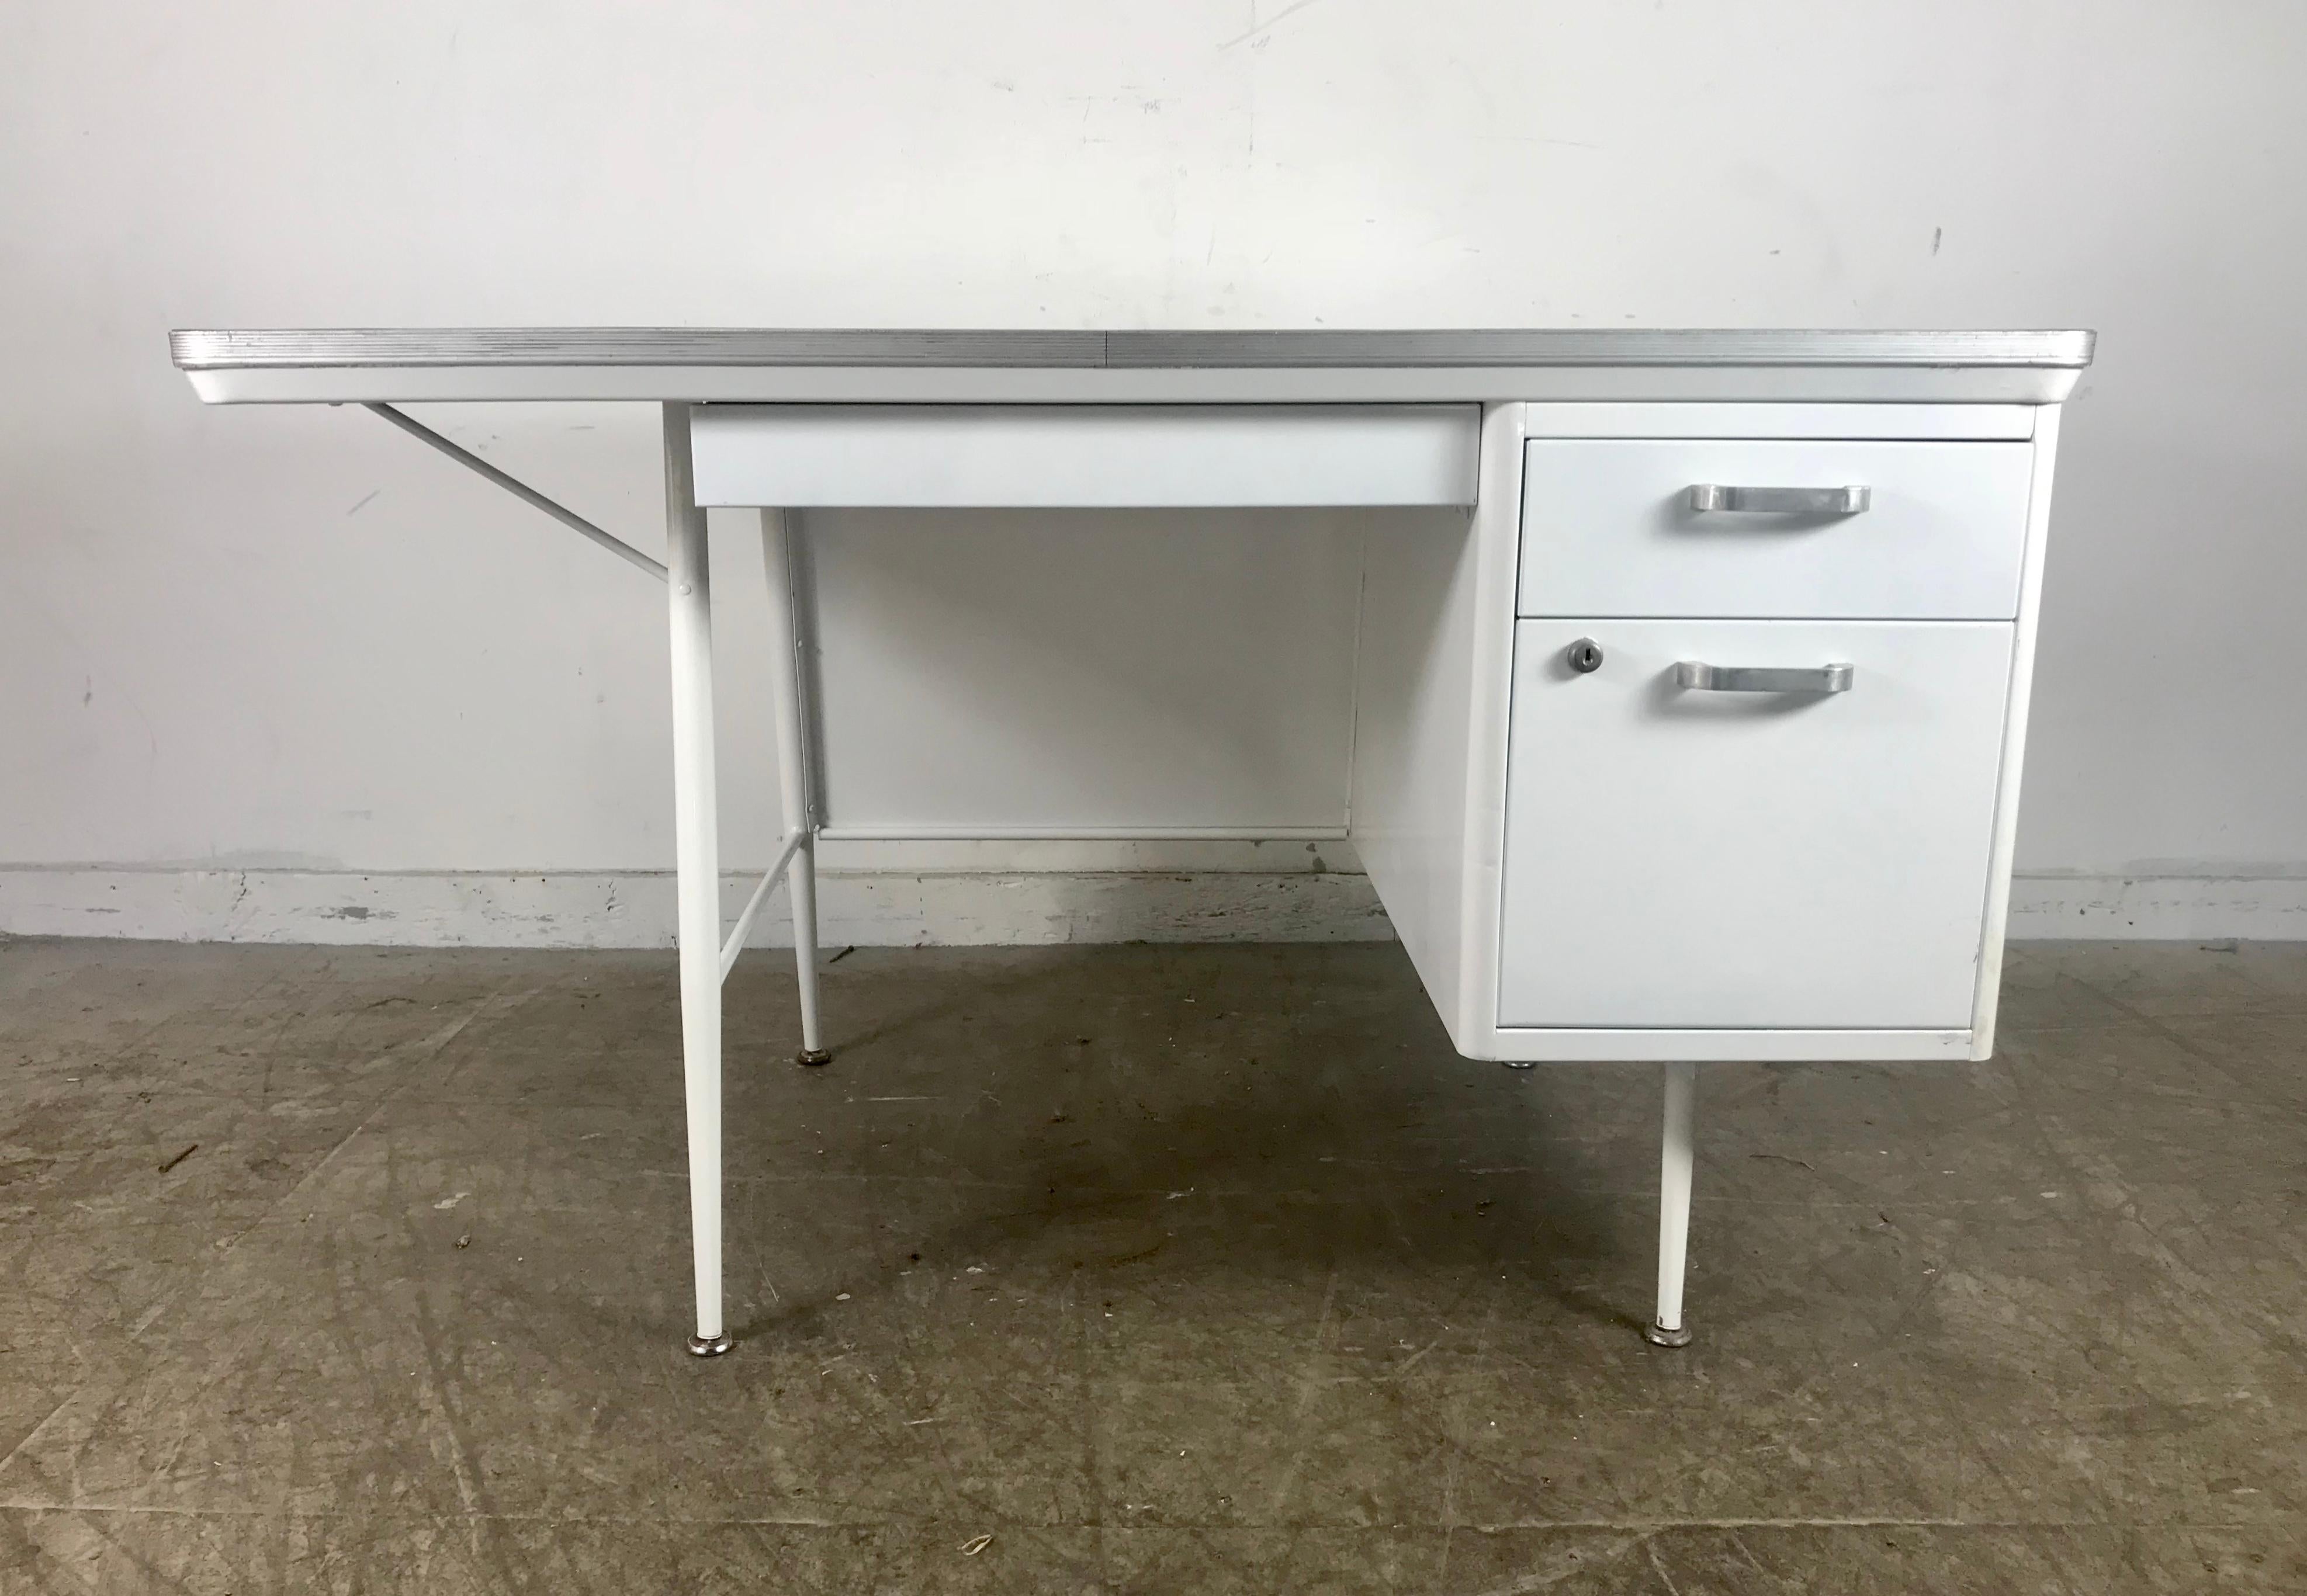 Modernist lacquered steel desk. Metal industrial. All steel industrial desk with faux wood laminate top. Fully restored and professionally lacquered in a beautiful white. Elegant and functional, featuring generous top pencil drawer, one right drawer